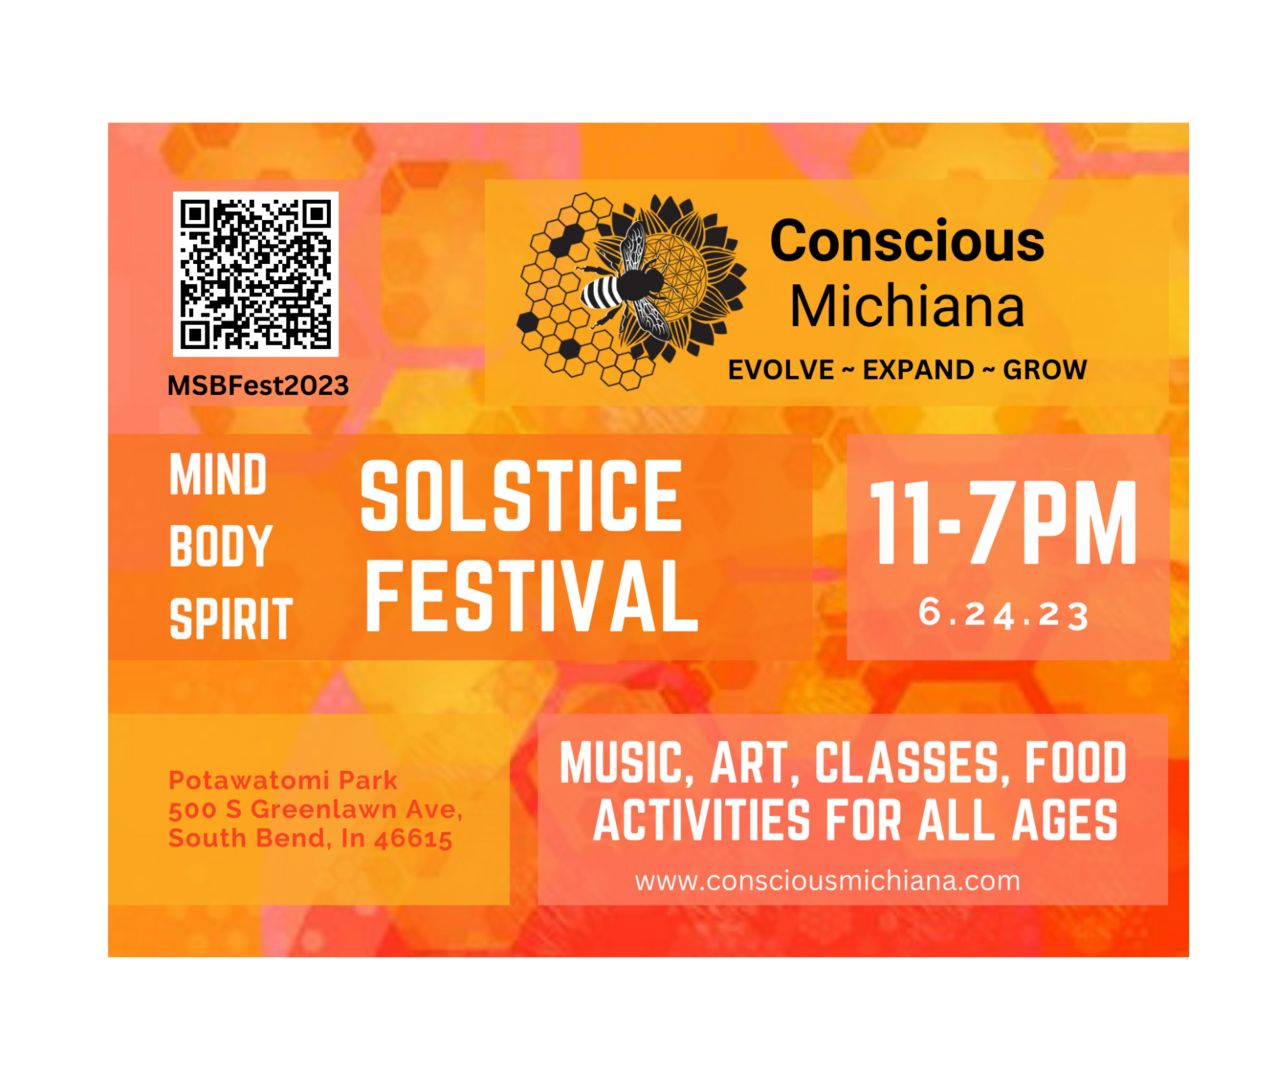 Conscious Michiana's MIND BODY SPIRIT Solstice Festival, South Bend, Indiana, United States